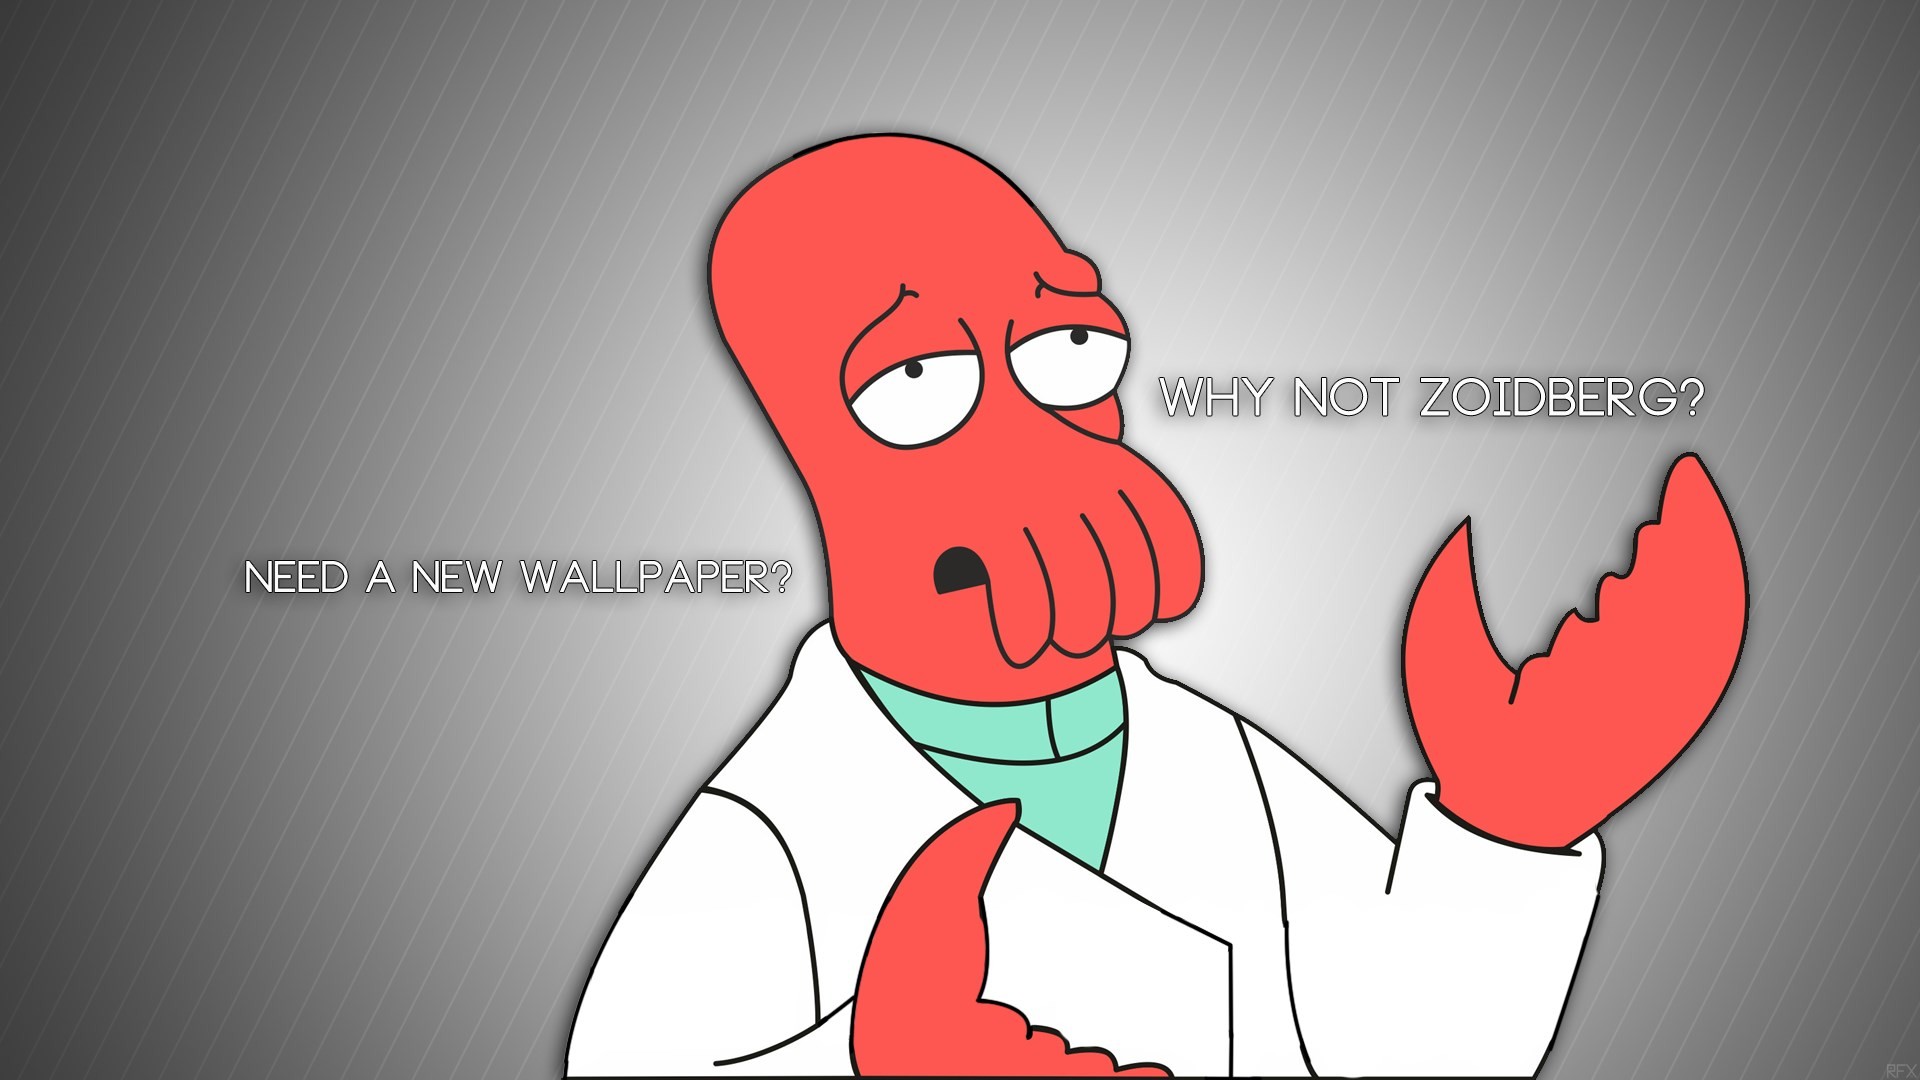 Dr Zoidberg Wallpaper (65+ images)
